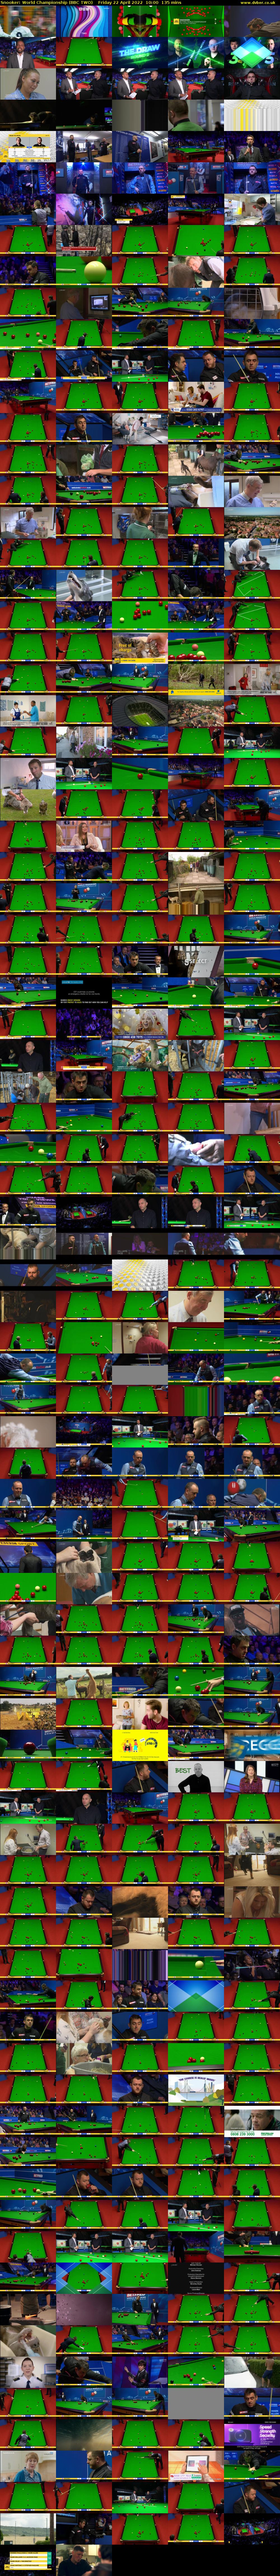 Snooker: World Championship (BBC TWO) Friday 22 April 2022 10:00 - 12:15